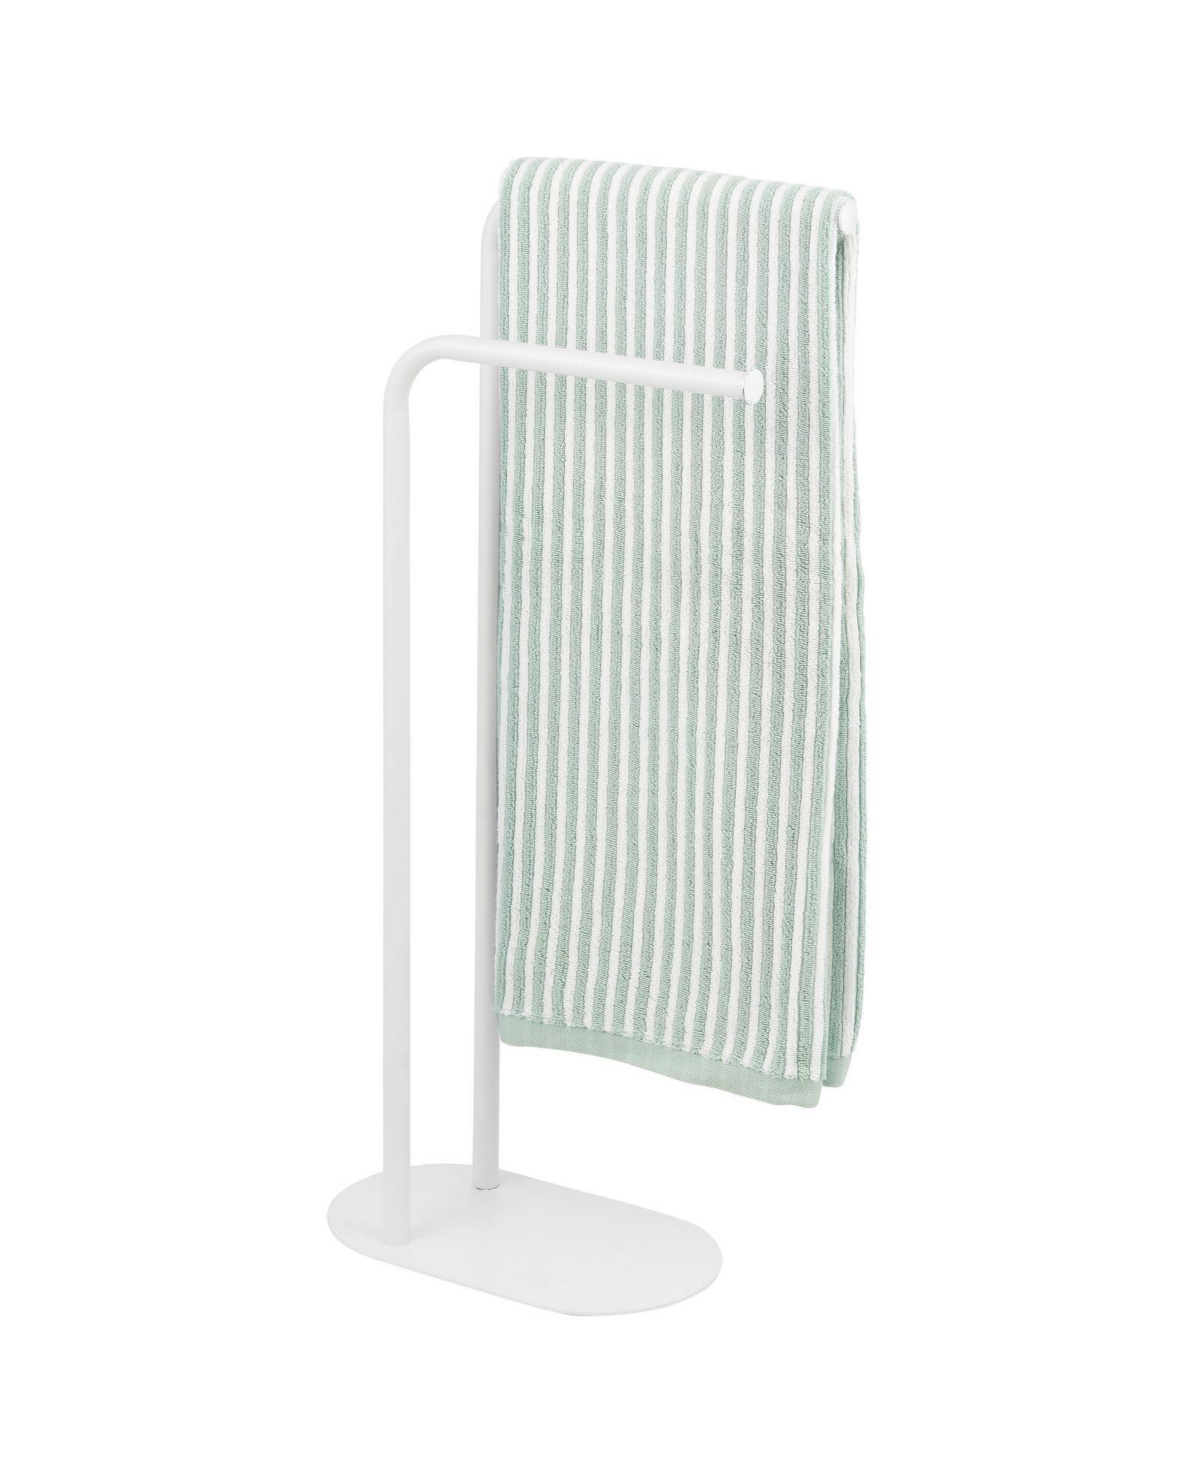 Tall Stainless Freestanding 2-Tier Towel Rack Holder Stand - Matte white